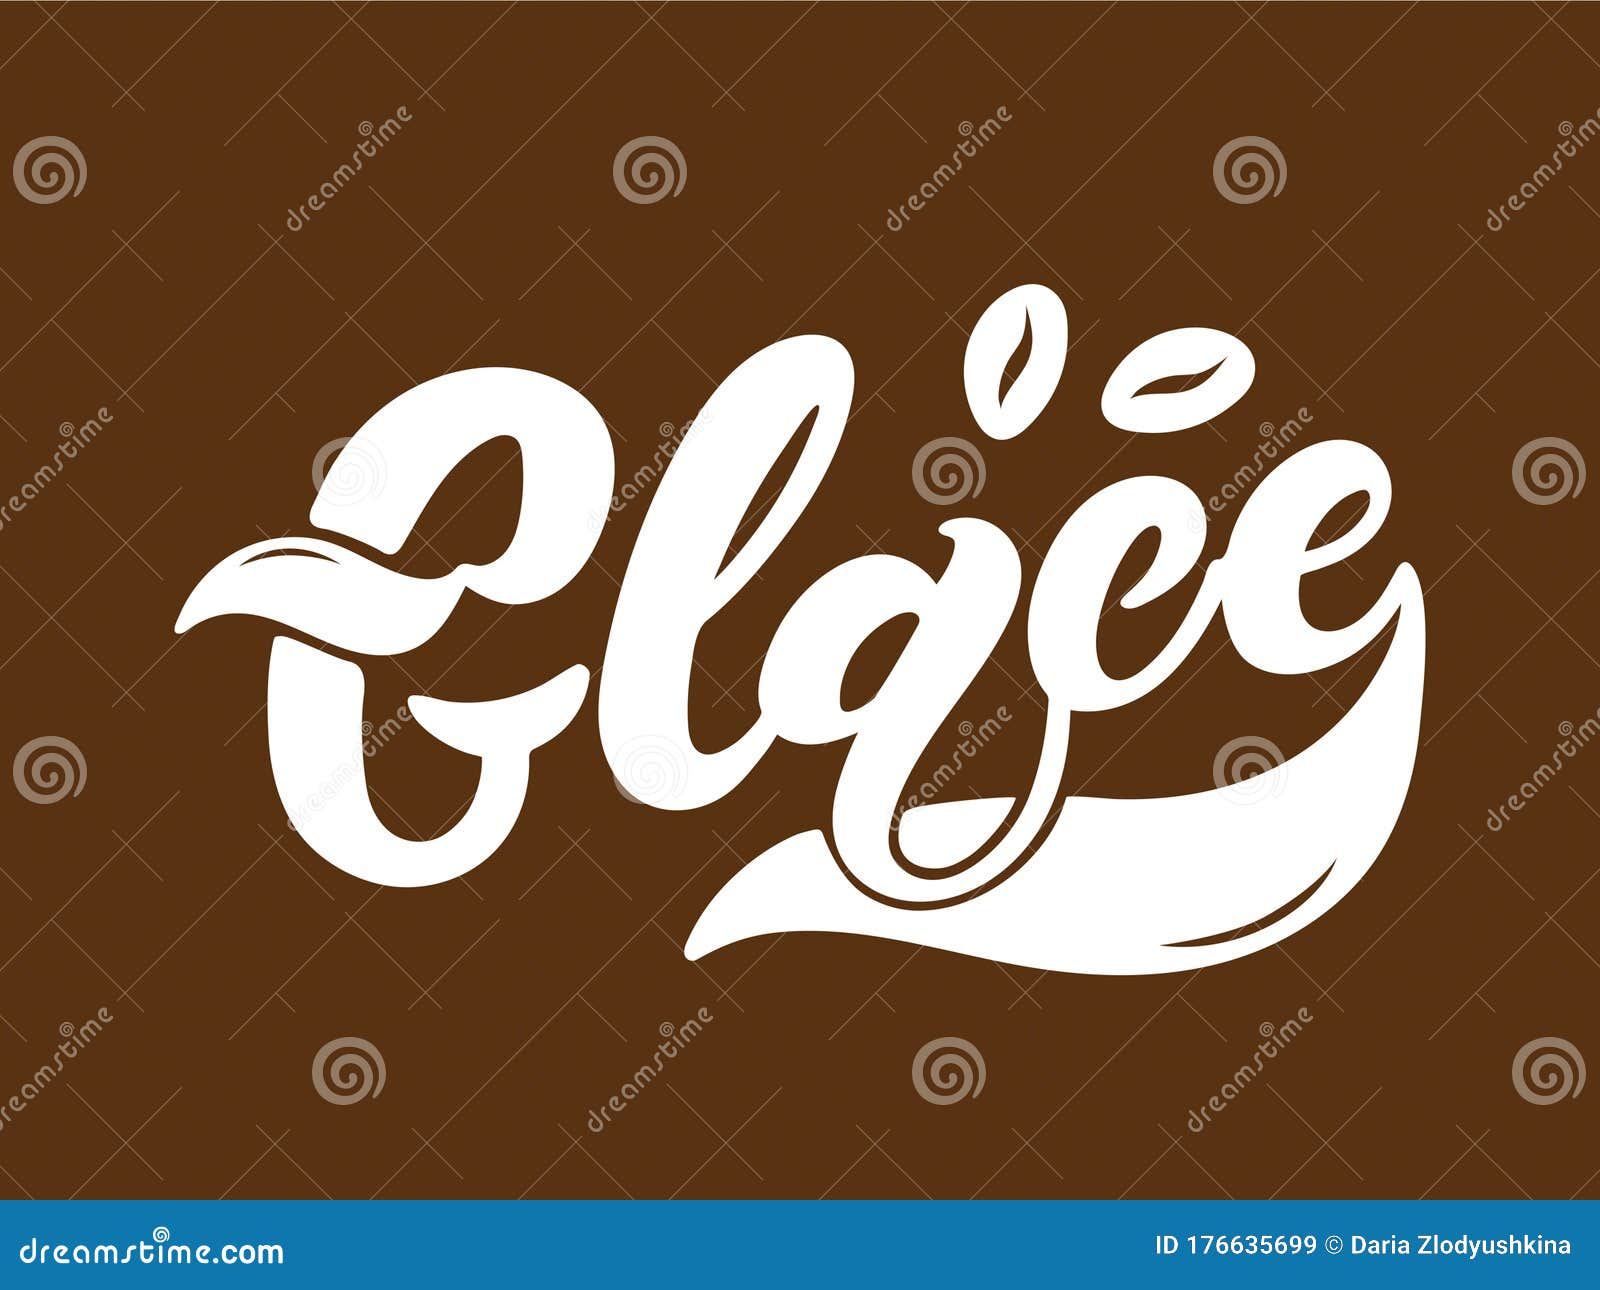 glace. the name of the type of coffee. hand drawn lettering.  illustra. the name of the type of coffee. hand drawn lettering